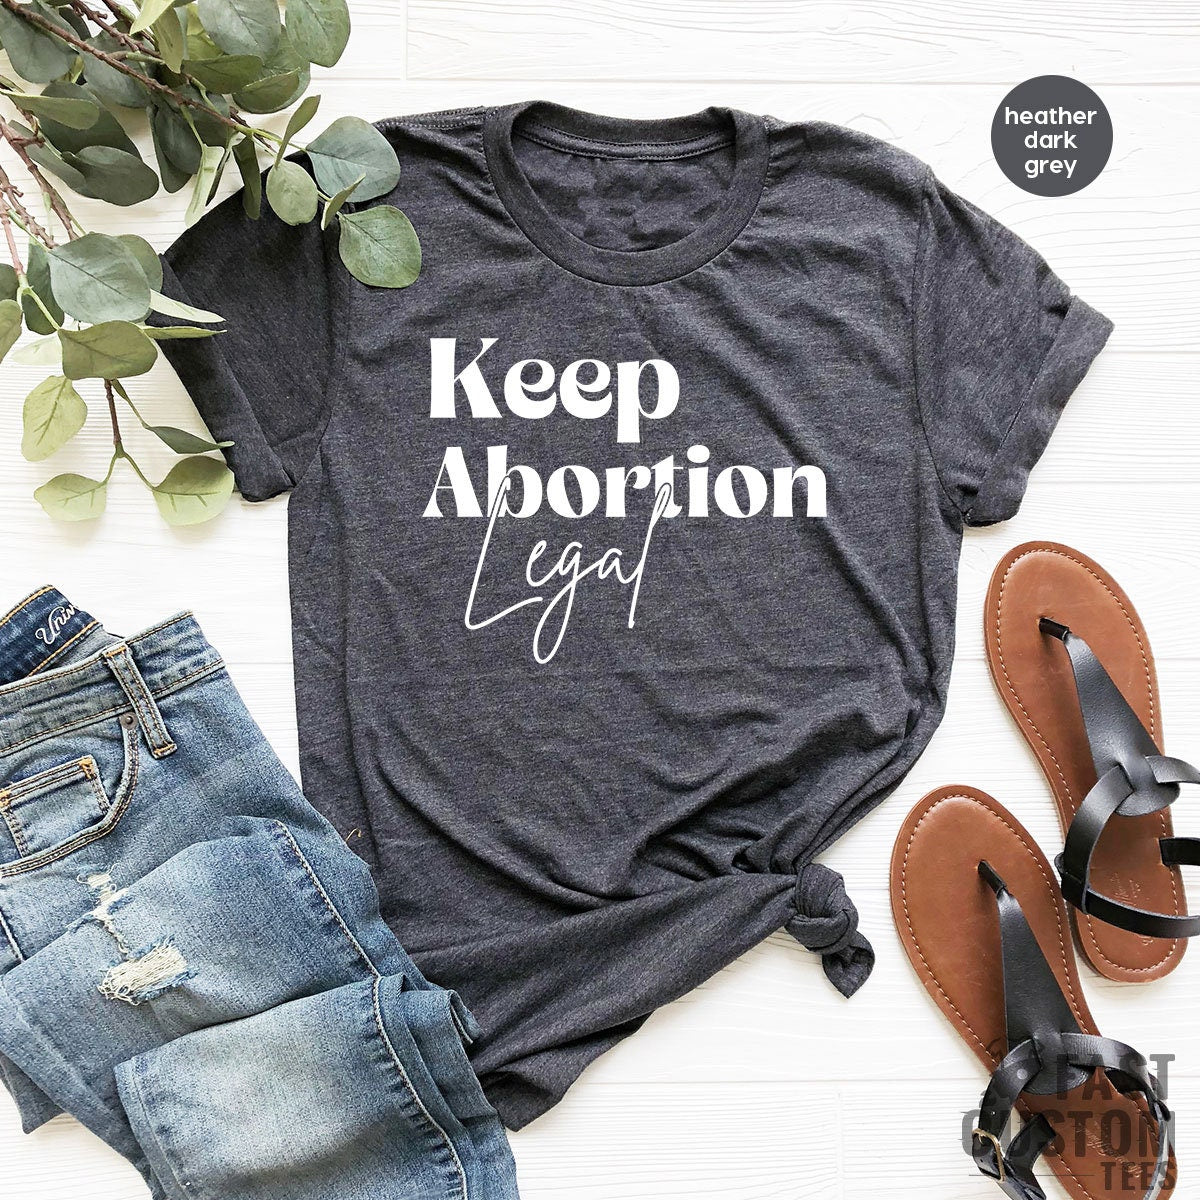 Keep Abortion Legal Shirt, Feminist Shirt, Pro Choice Shirt, Protest T-shirt, Women's Right Shirts, Gift For Her, Shirts For Women, Girl Tee - Fastdeliverytees.com